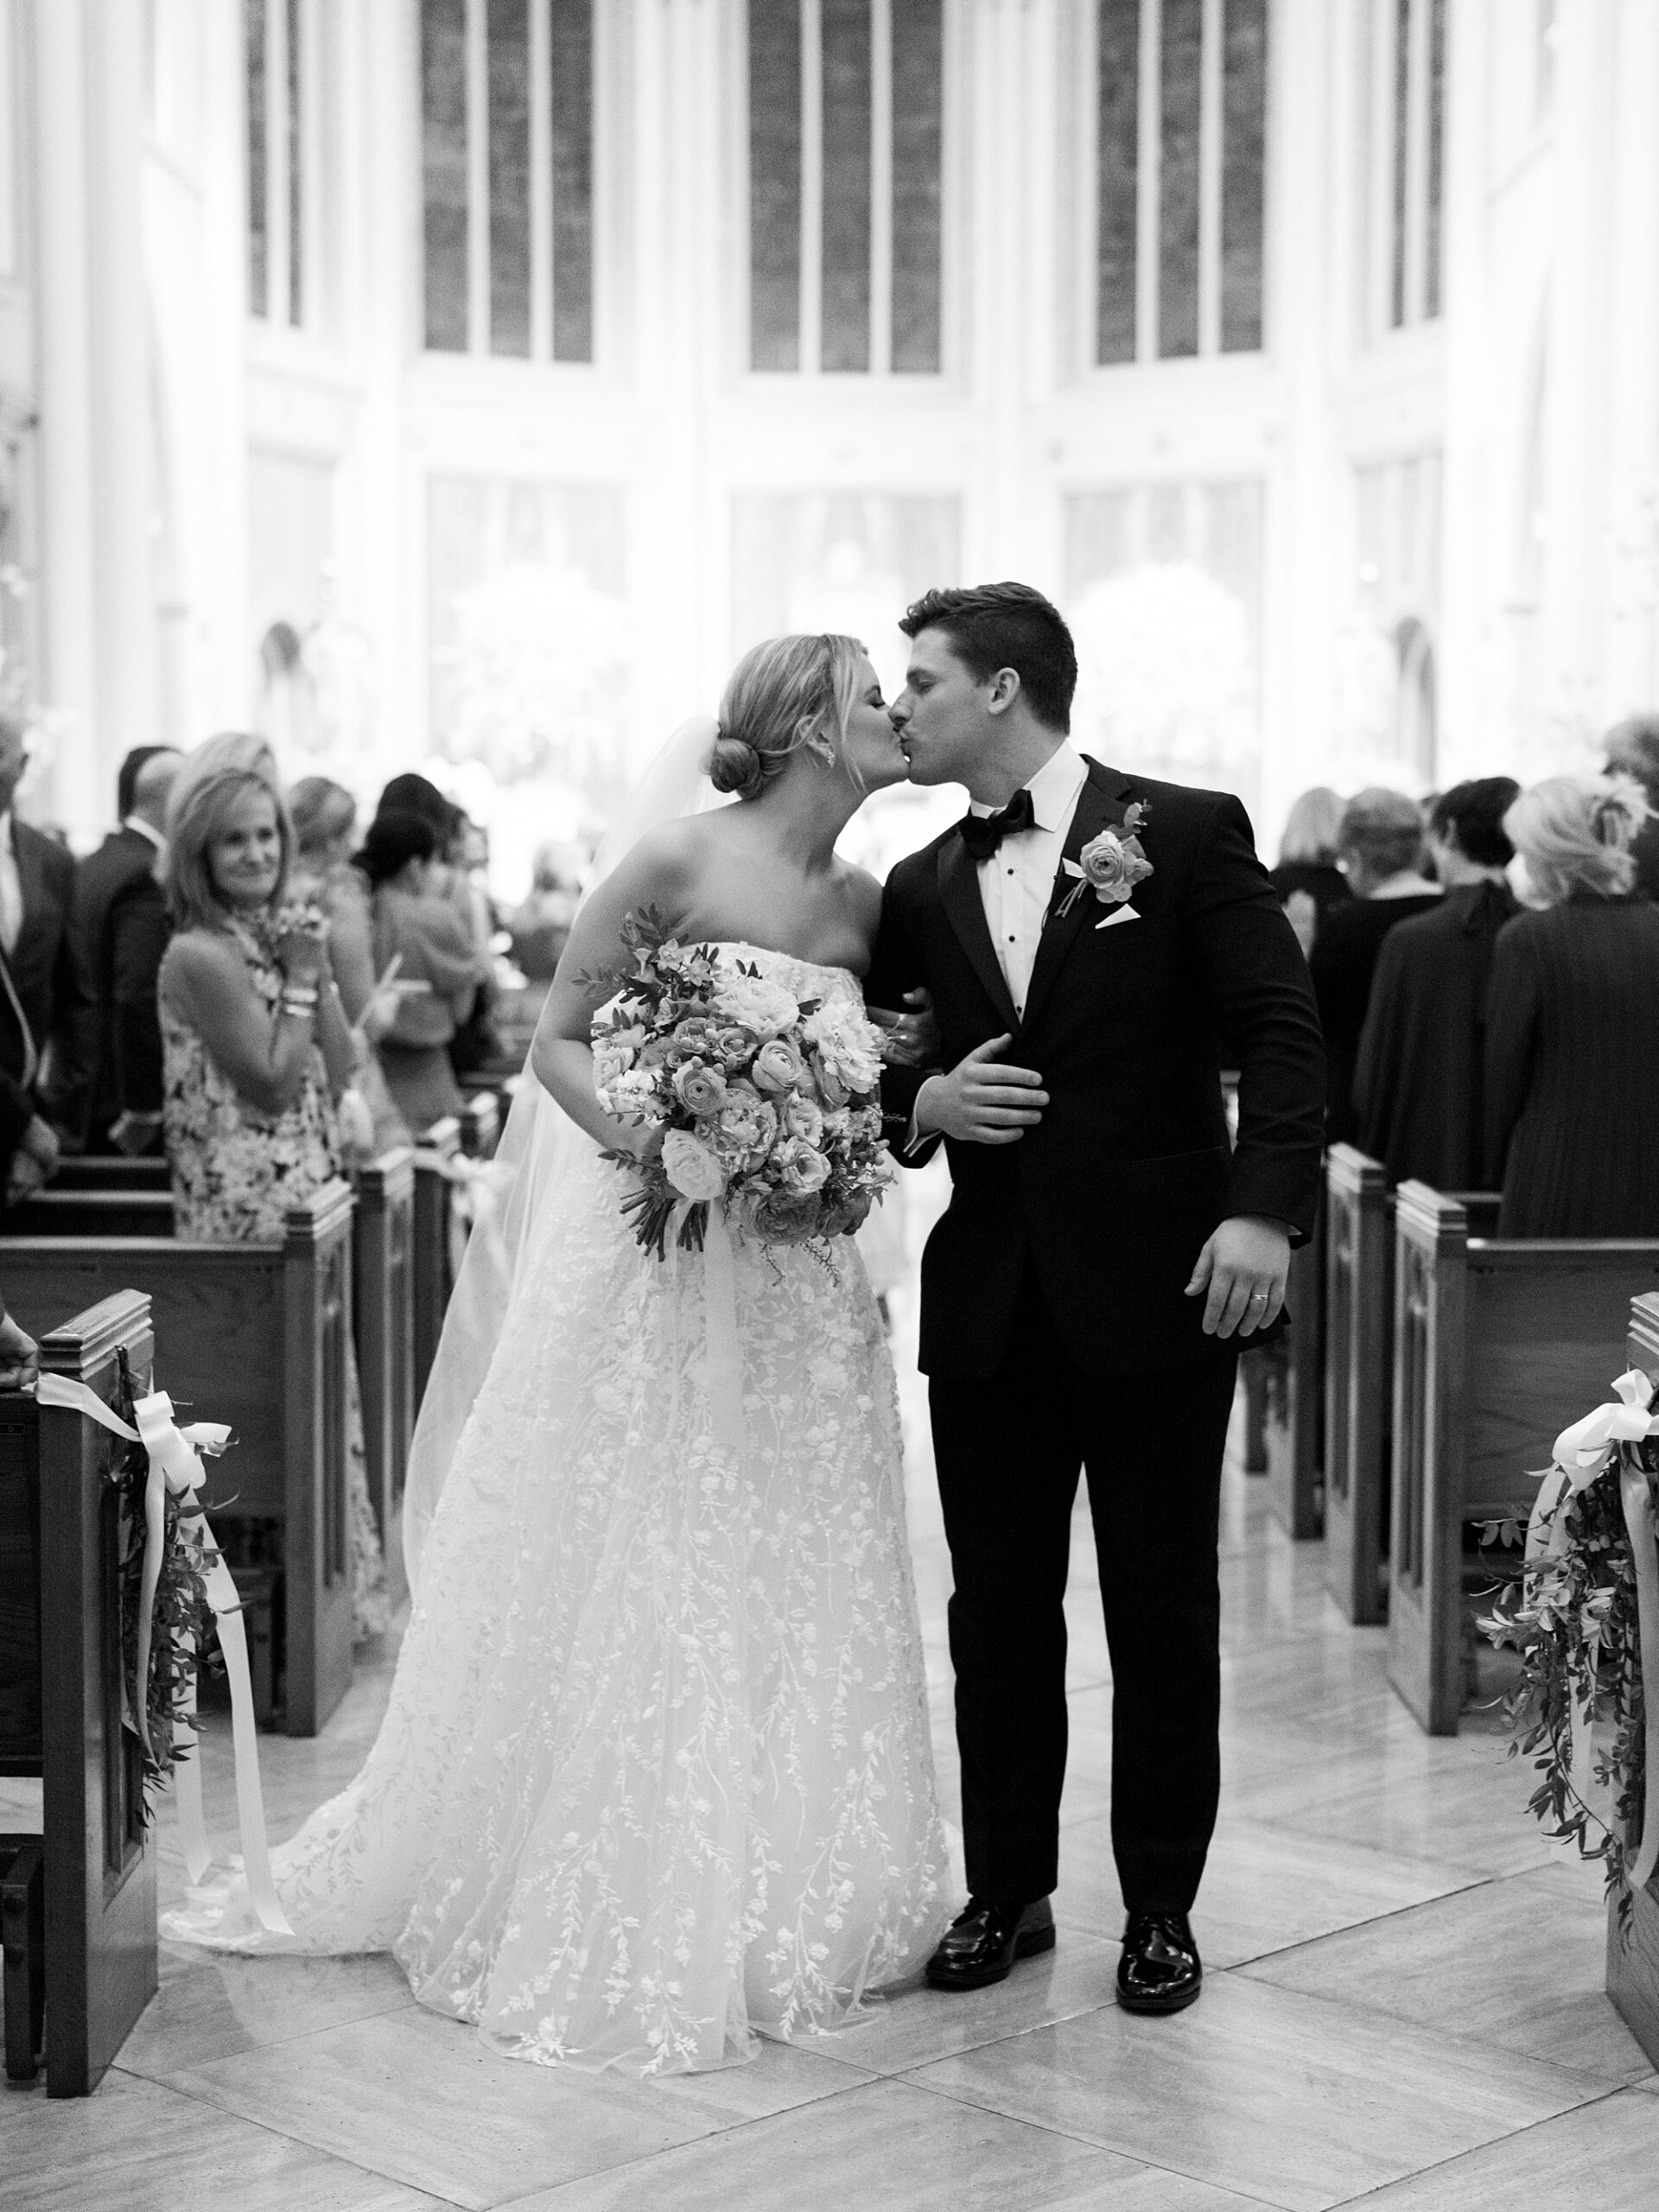 newlyweds kiss in aisle after ceremony at the Cathedral of St. John the Evangelist